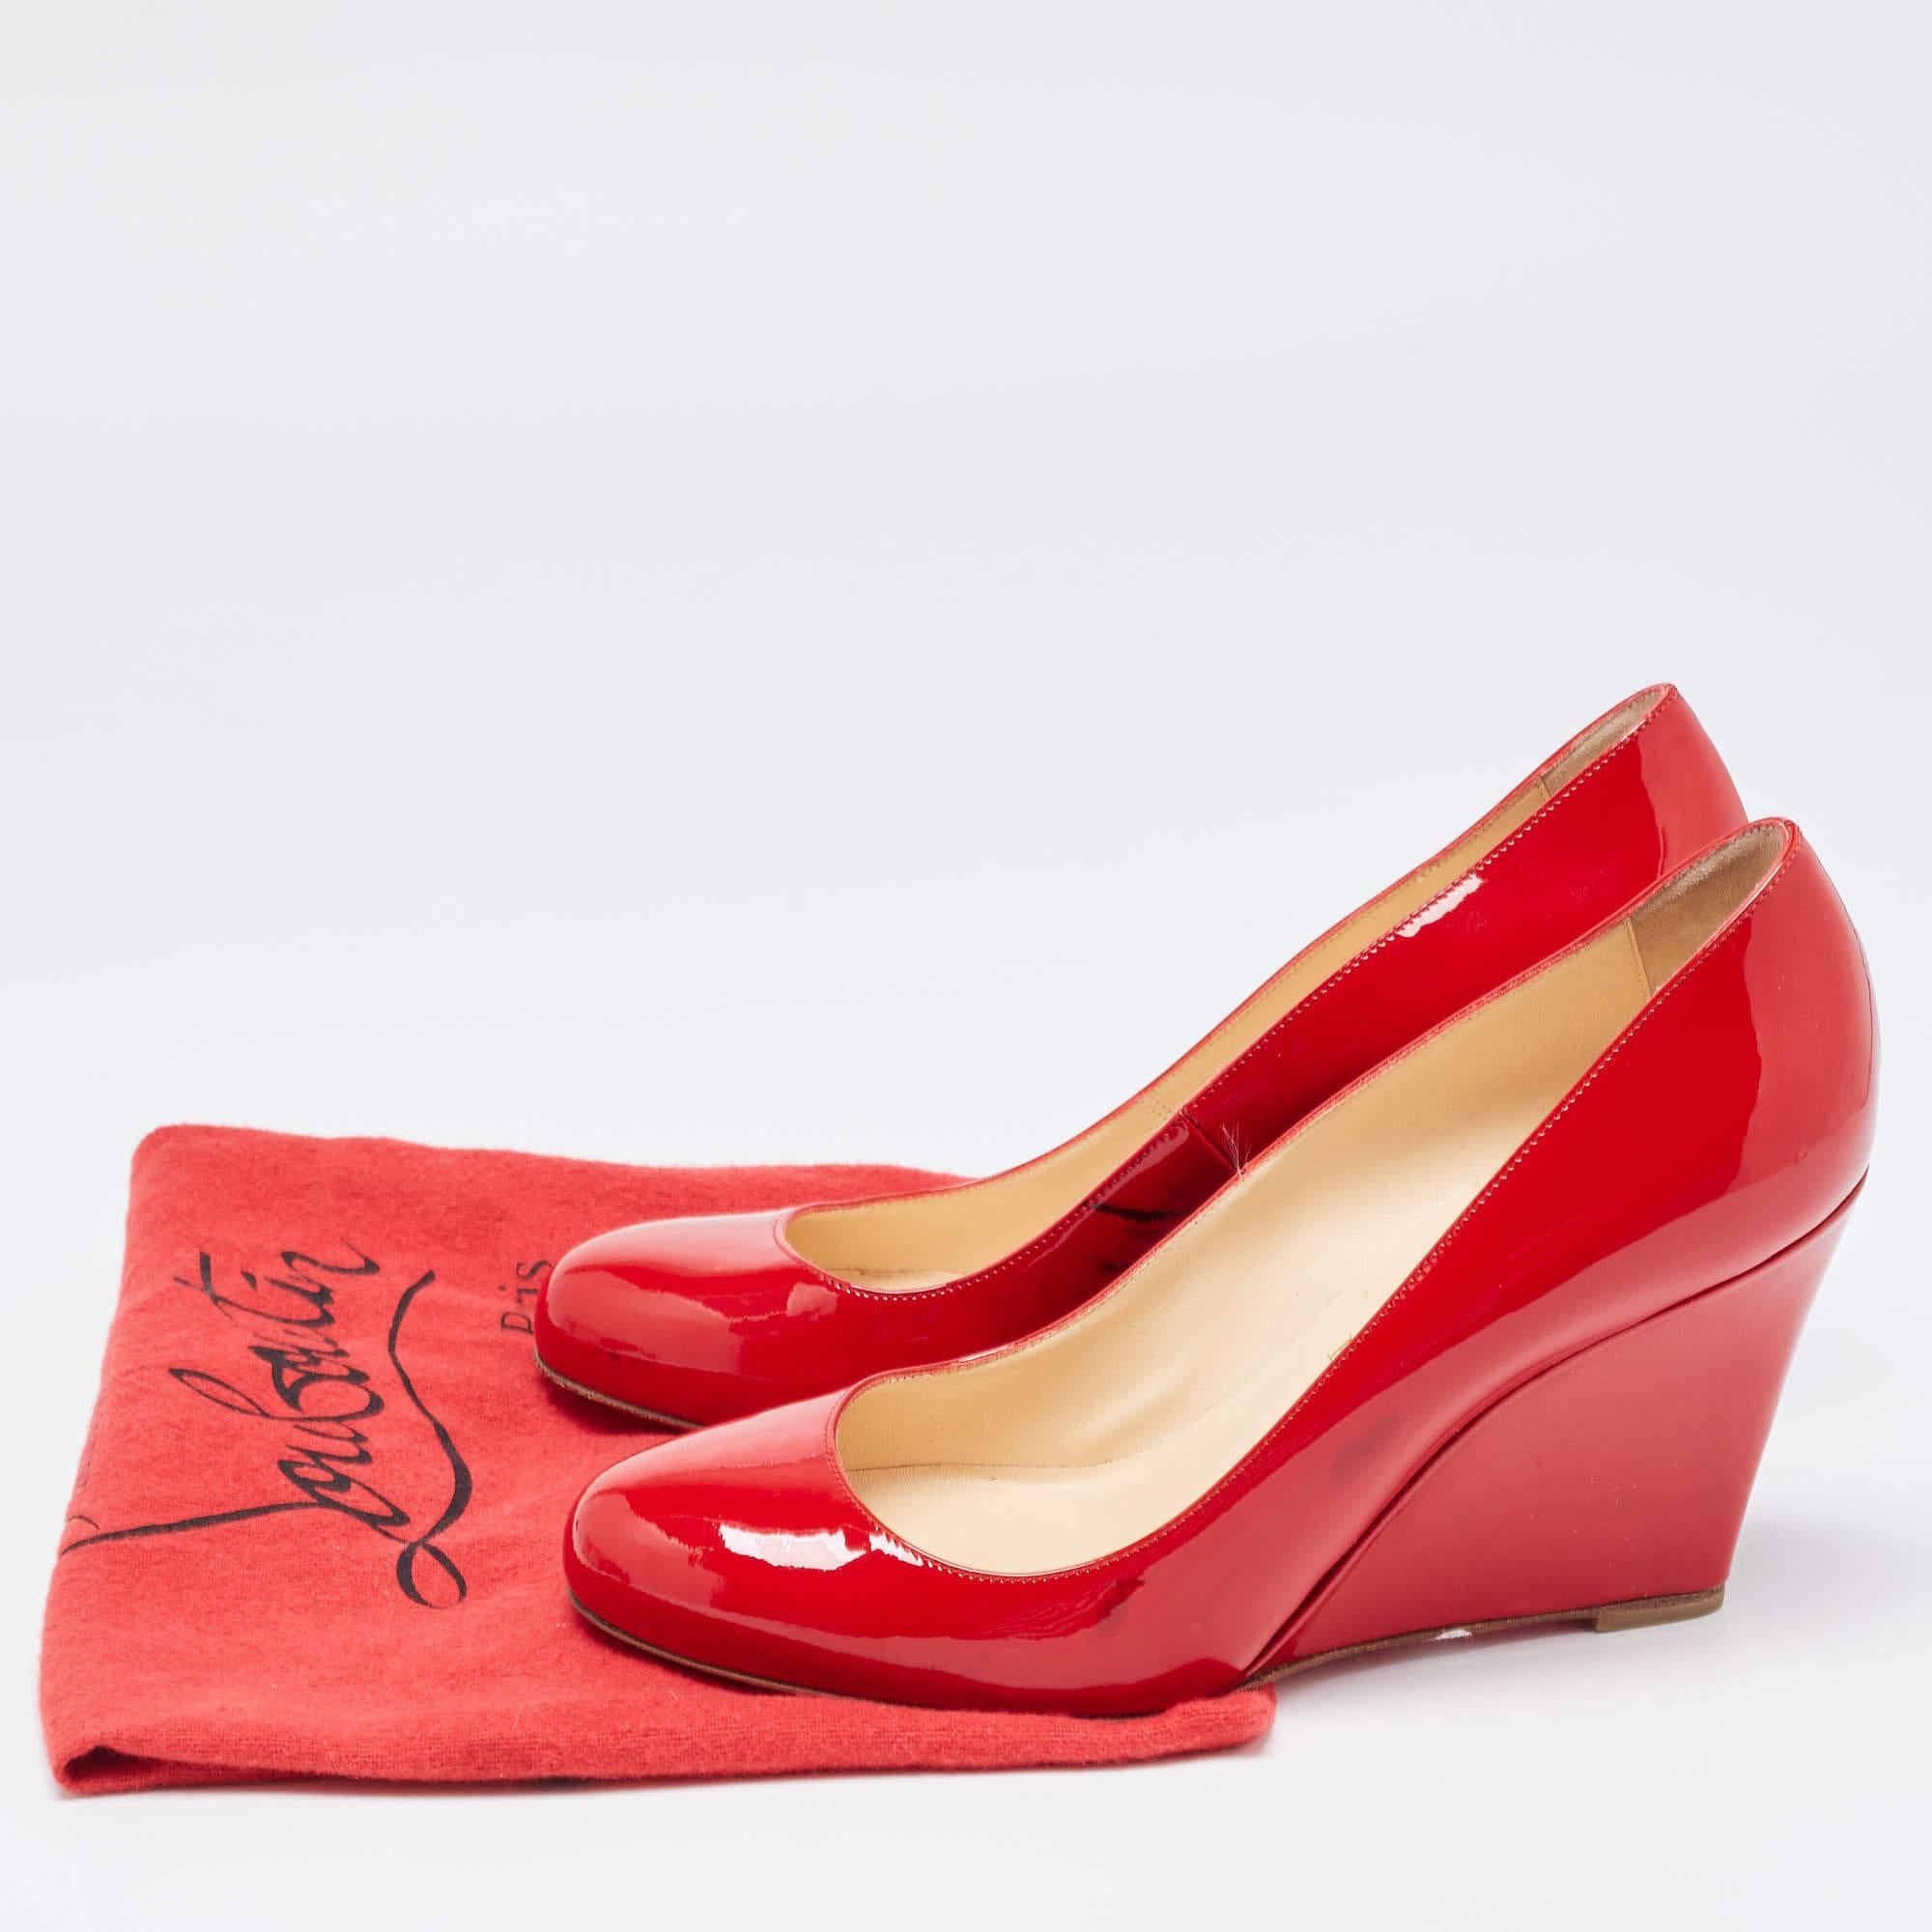 Christian Louboutin Red Patent Leather Ron Ron Wedge Pumps Size 38.5 For Sale 4